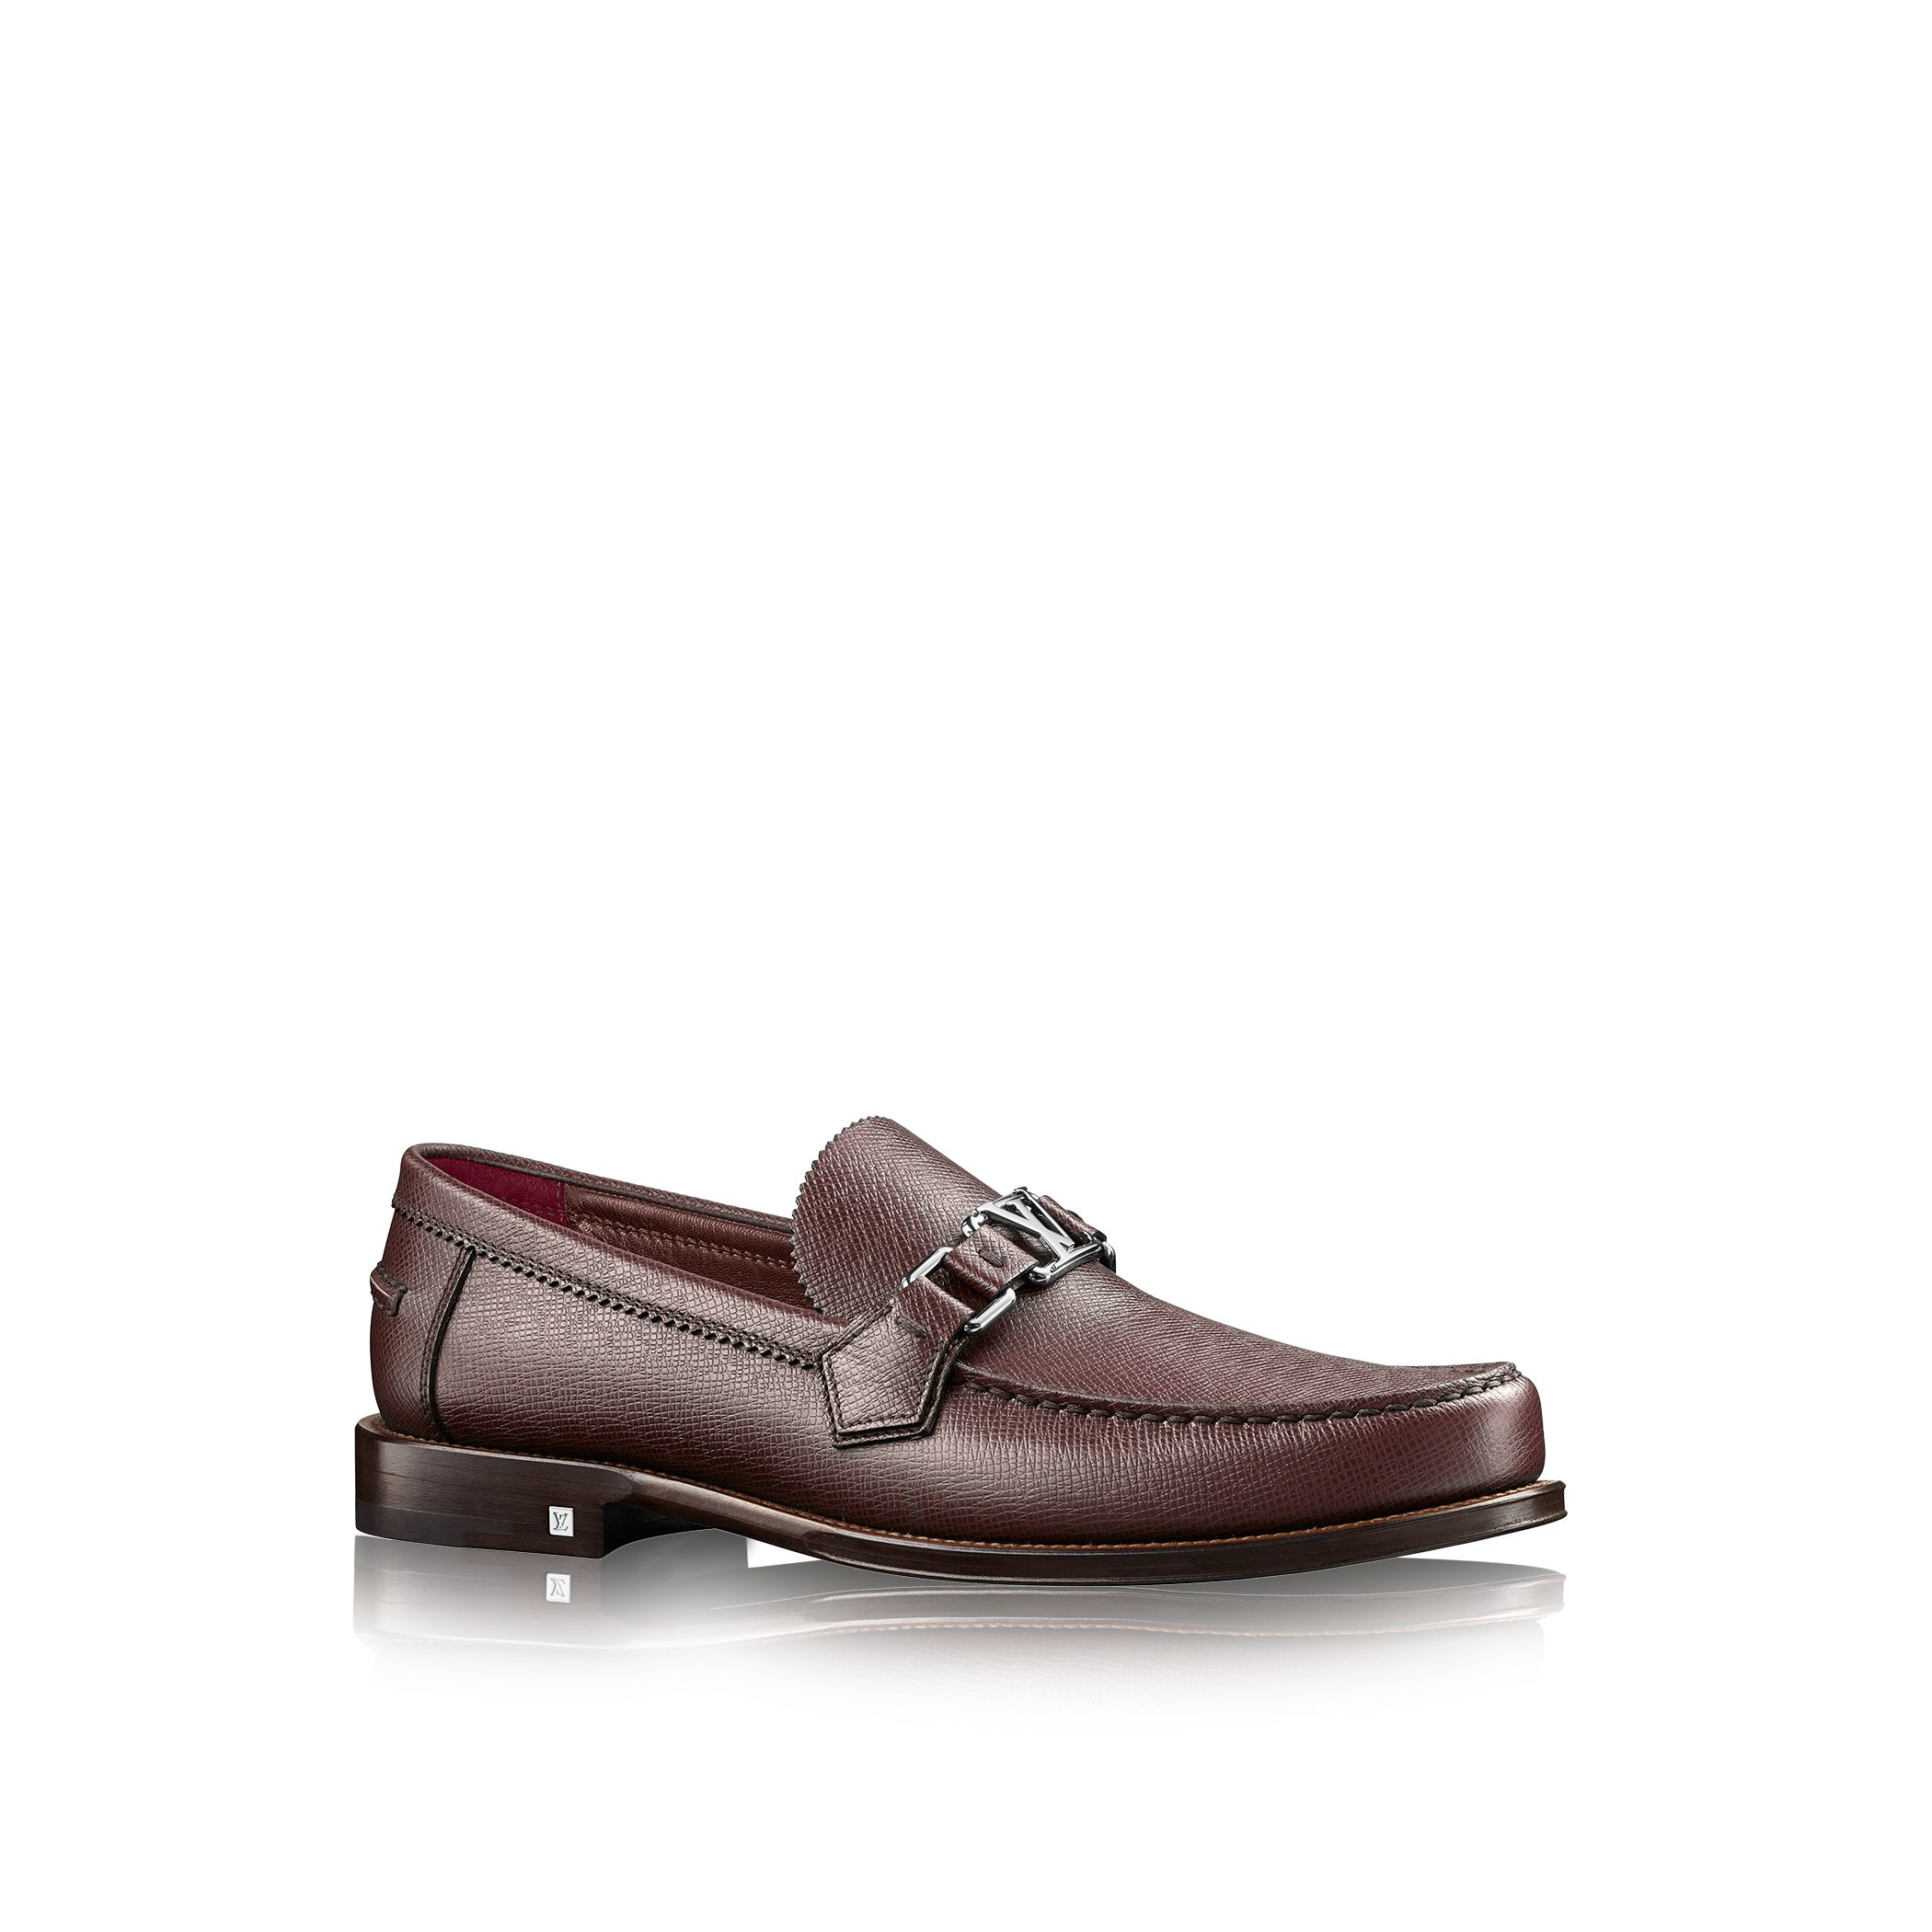 Louis Vuitton Mens Brown Loafers | Confederated Tribes of the Umatilla Indian Reservation